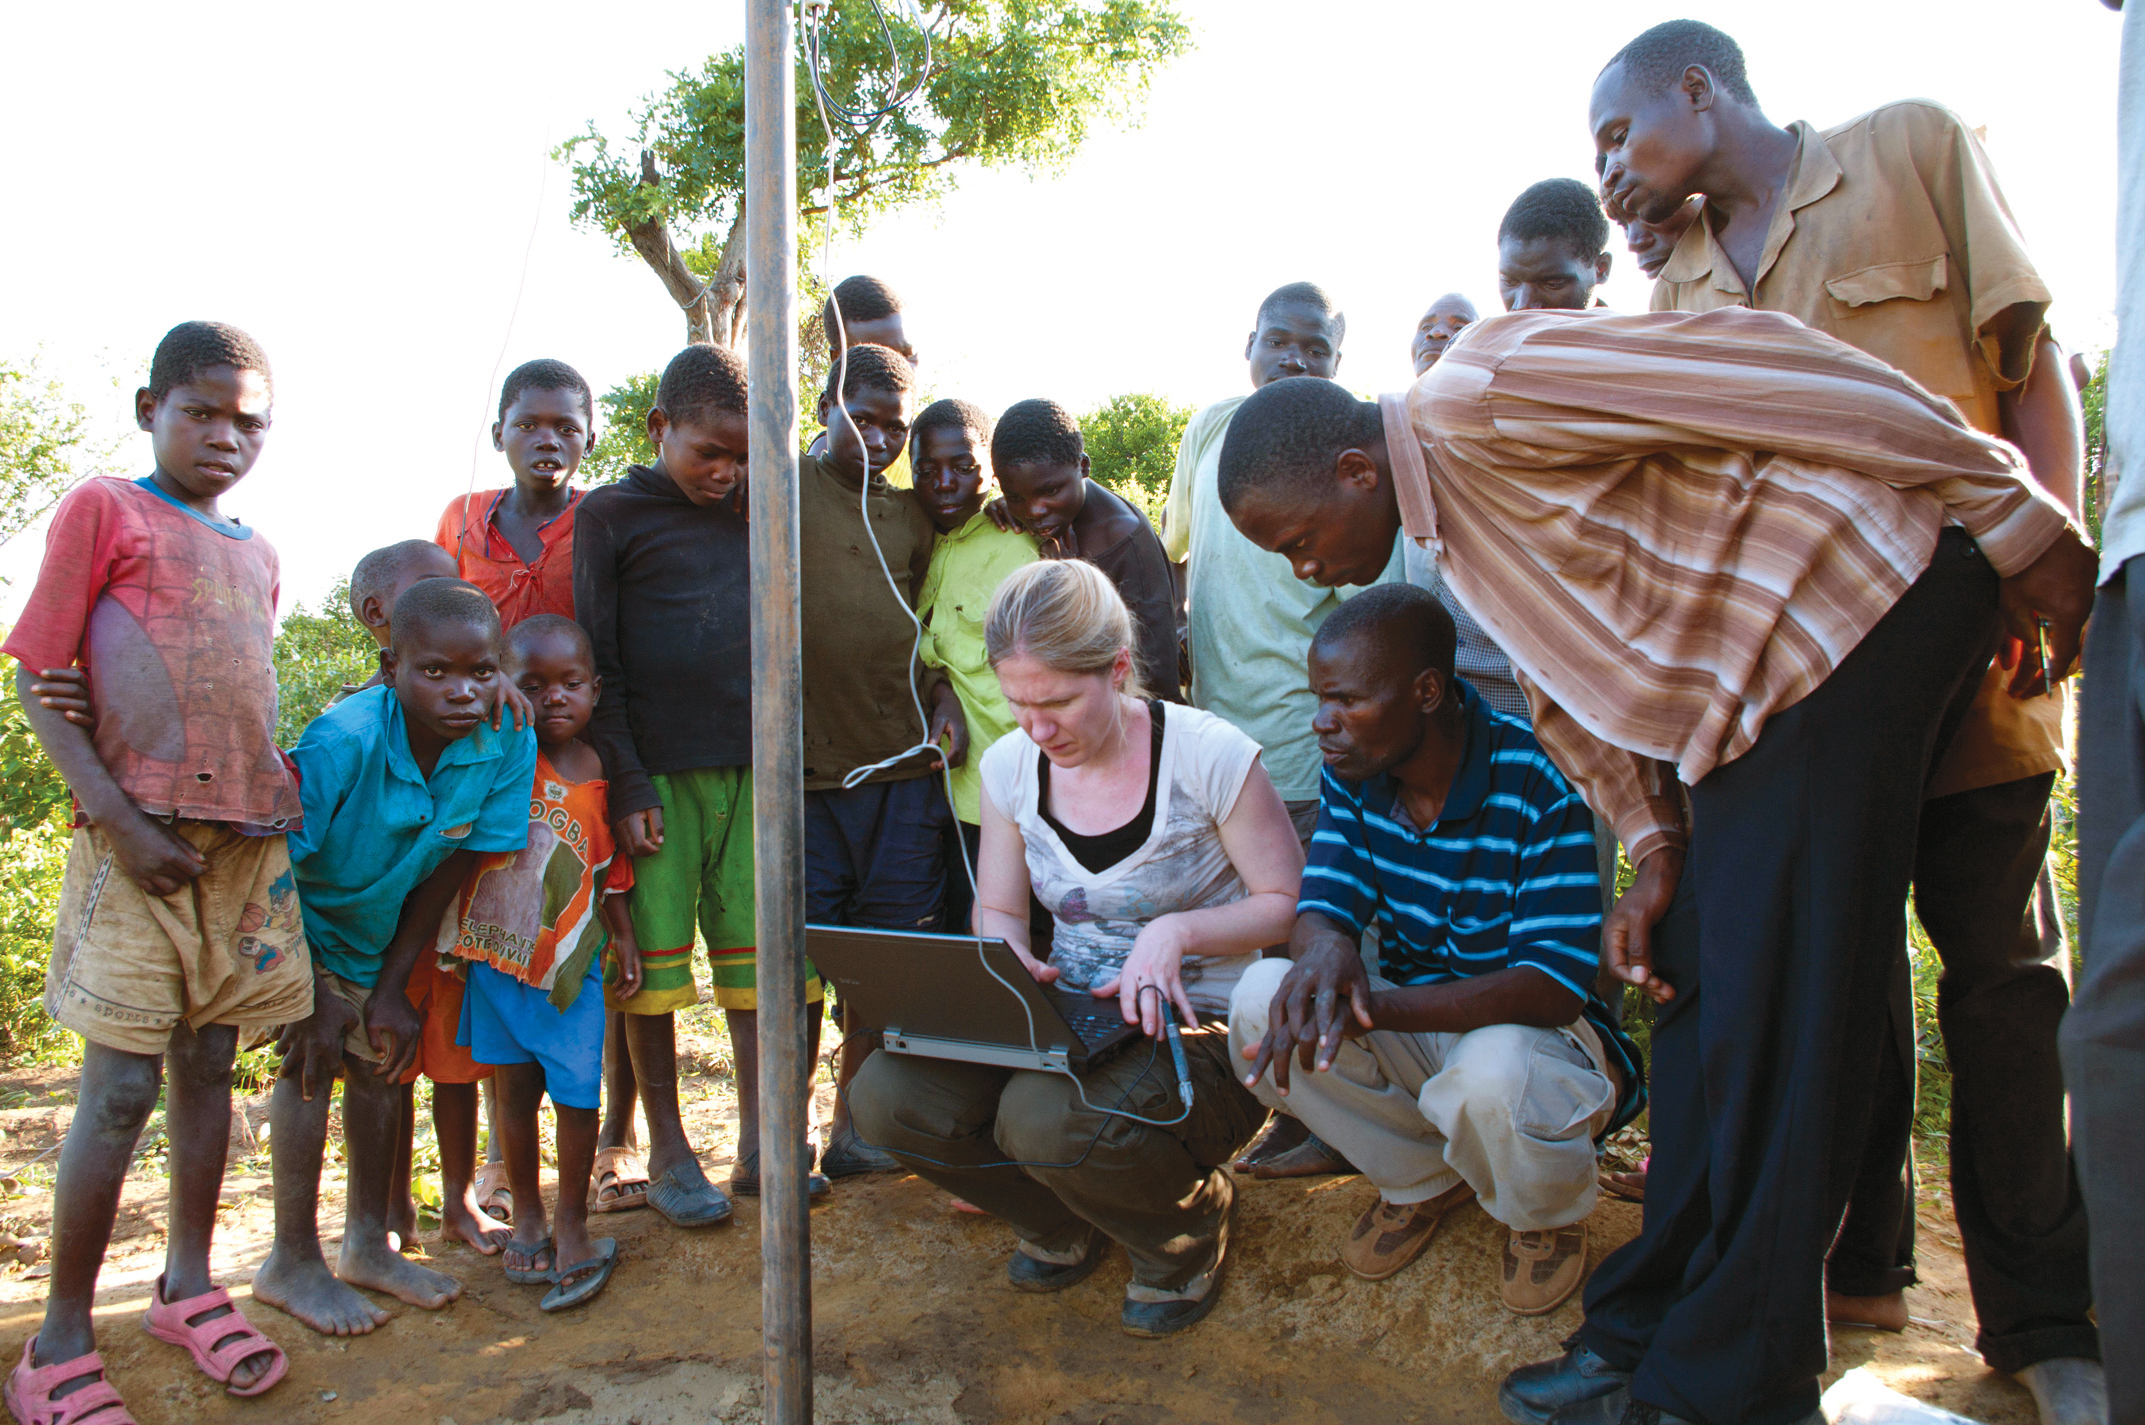 Group gathers around Darcy Boellstorff as she plugs her computer into a GIS system near Mzimba.